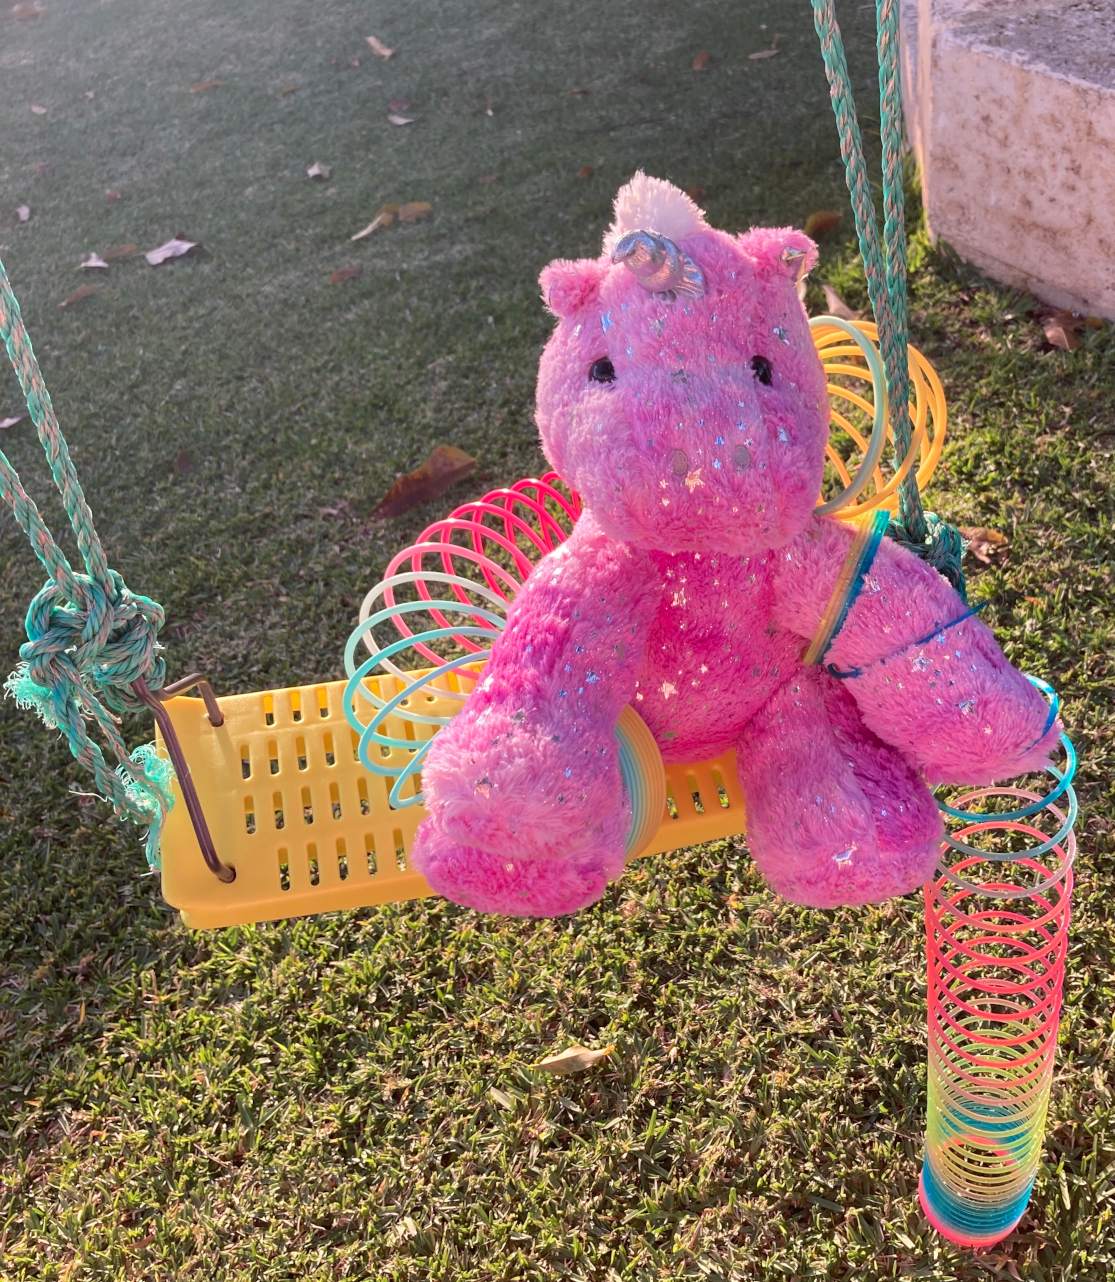 Pink Unicorn sitting on swing playing with two slinkies, clear weather daytime